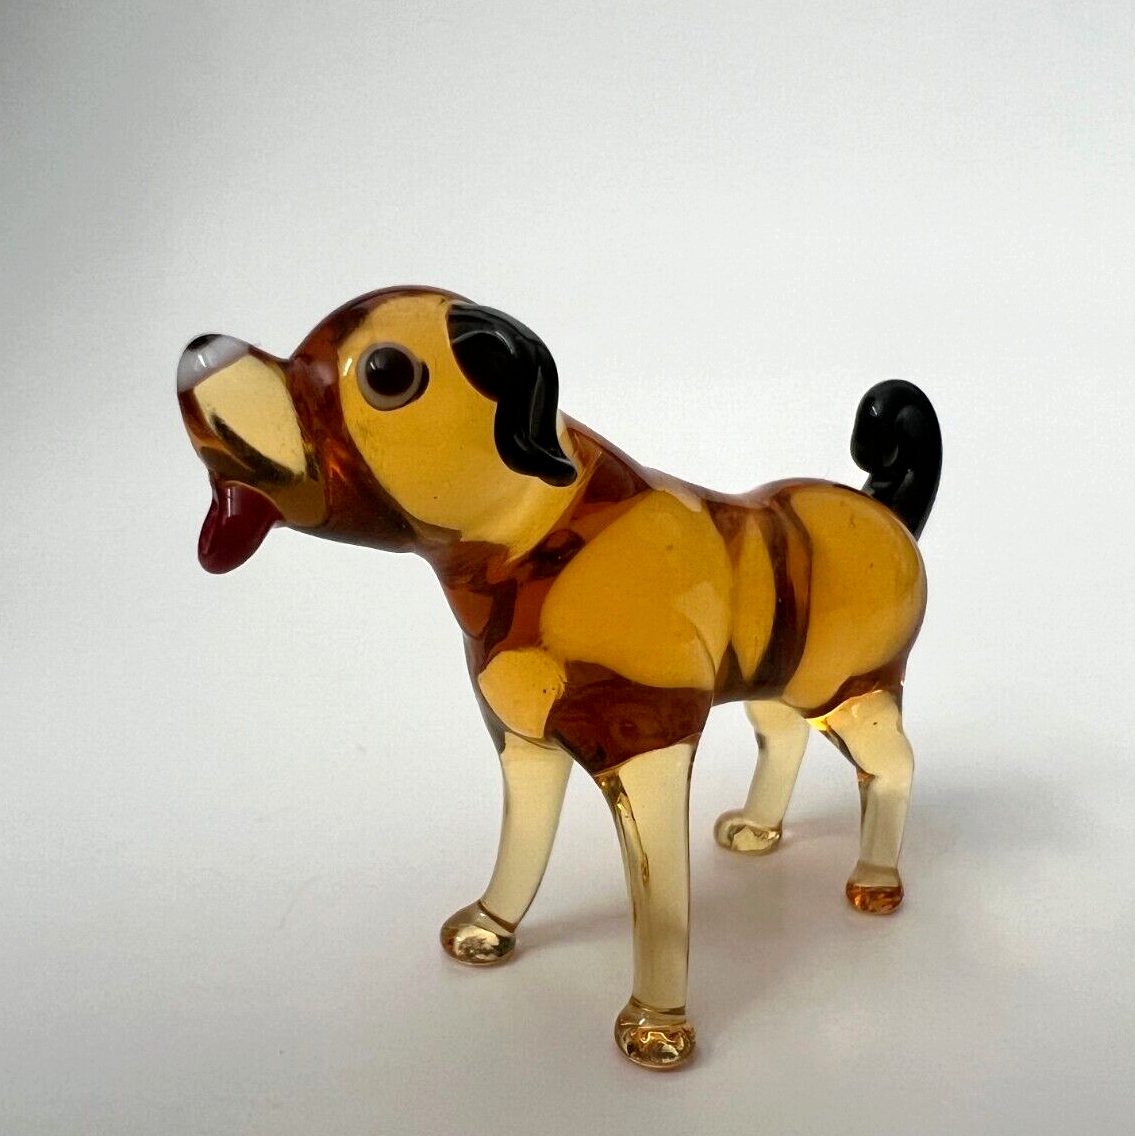 Primary image for Murano Glass, Handcrafted Unique Lovely Brown Puppy Figurine, Glass Art, Size 1